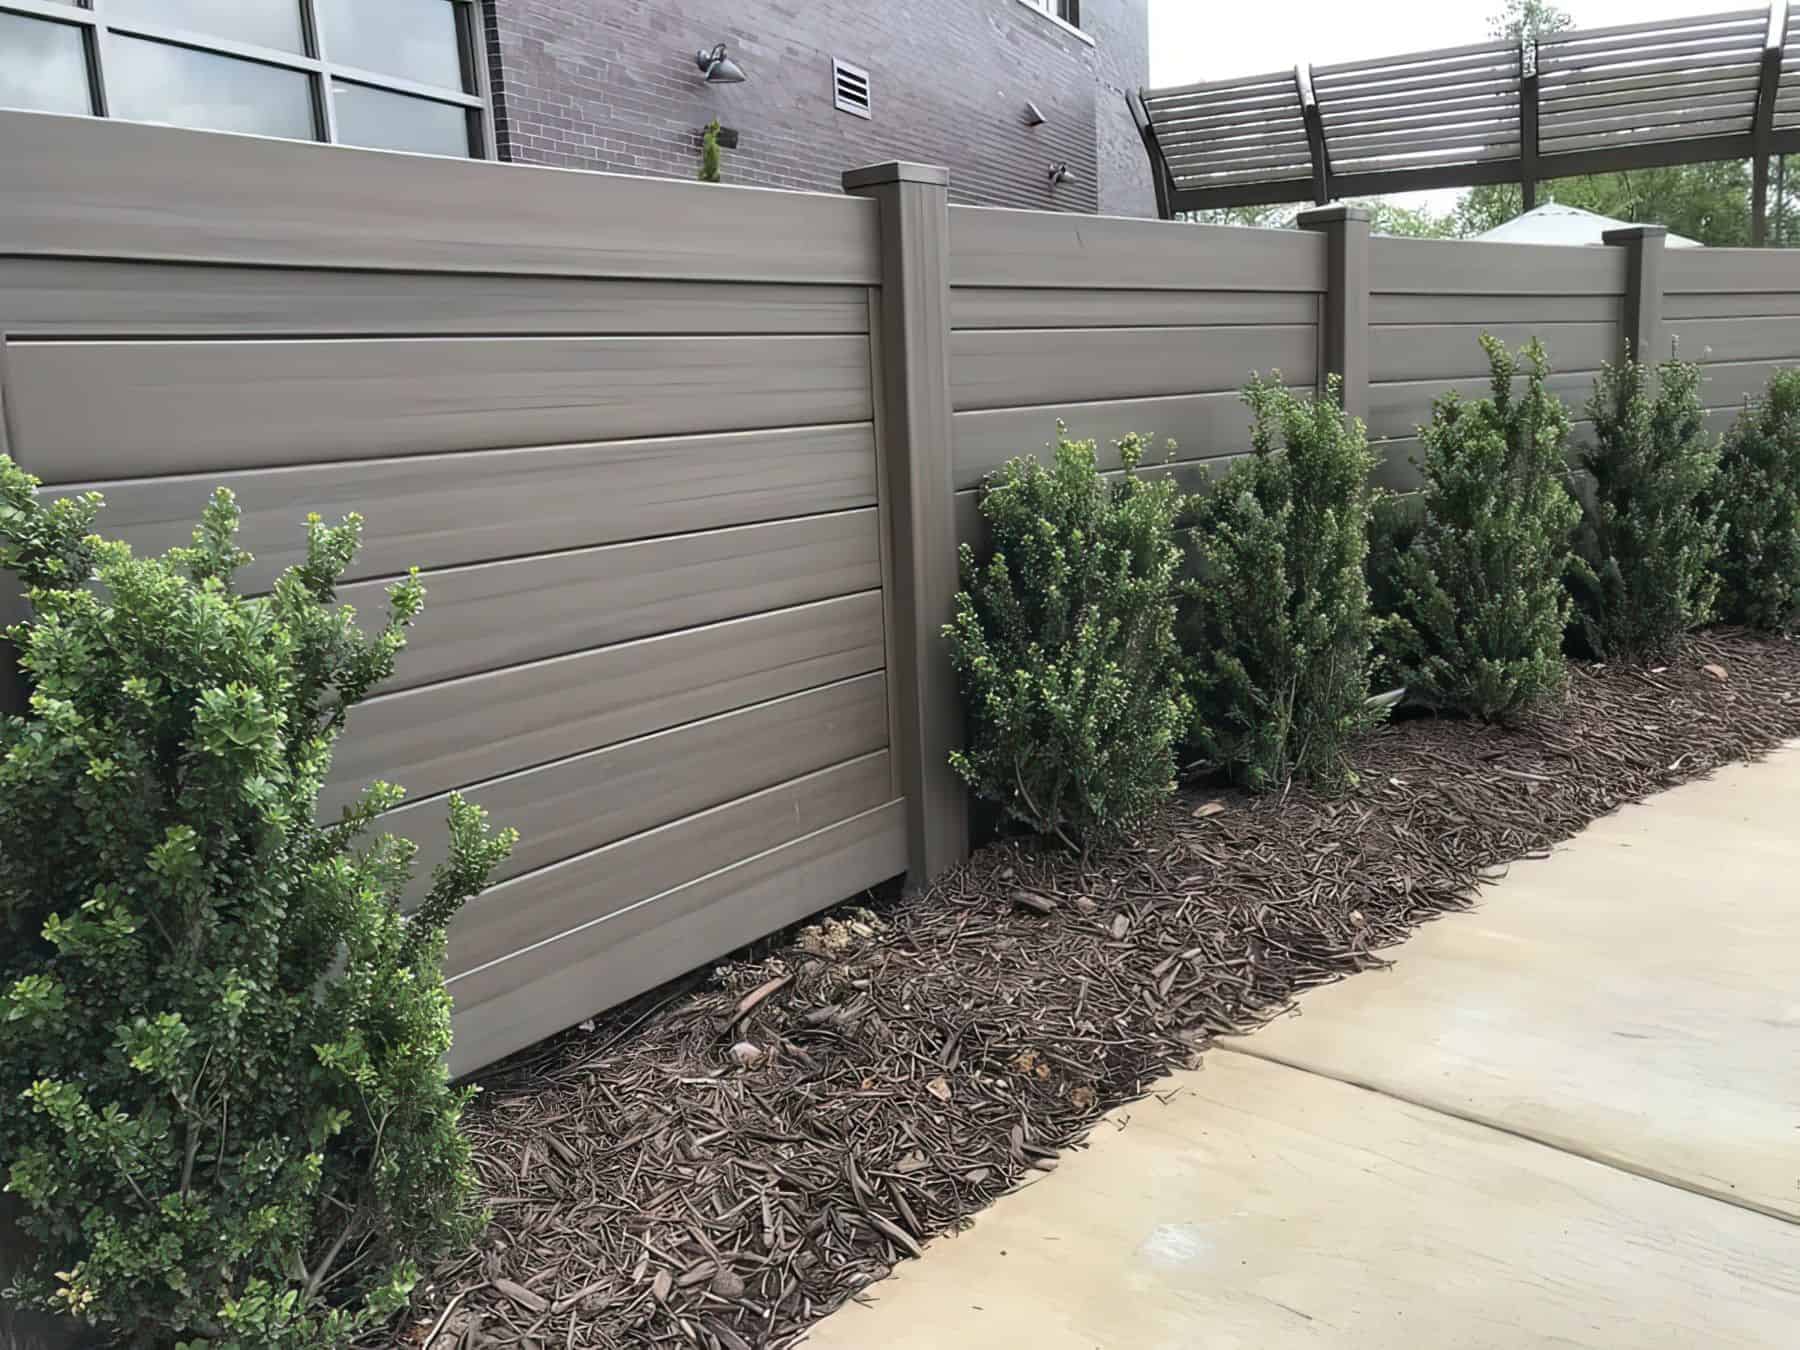 Vinyl clay colored fence surrounded leading to side passage wtih small shrubs lining concrete sidewalk in front.